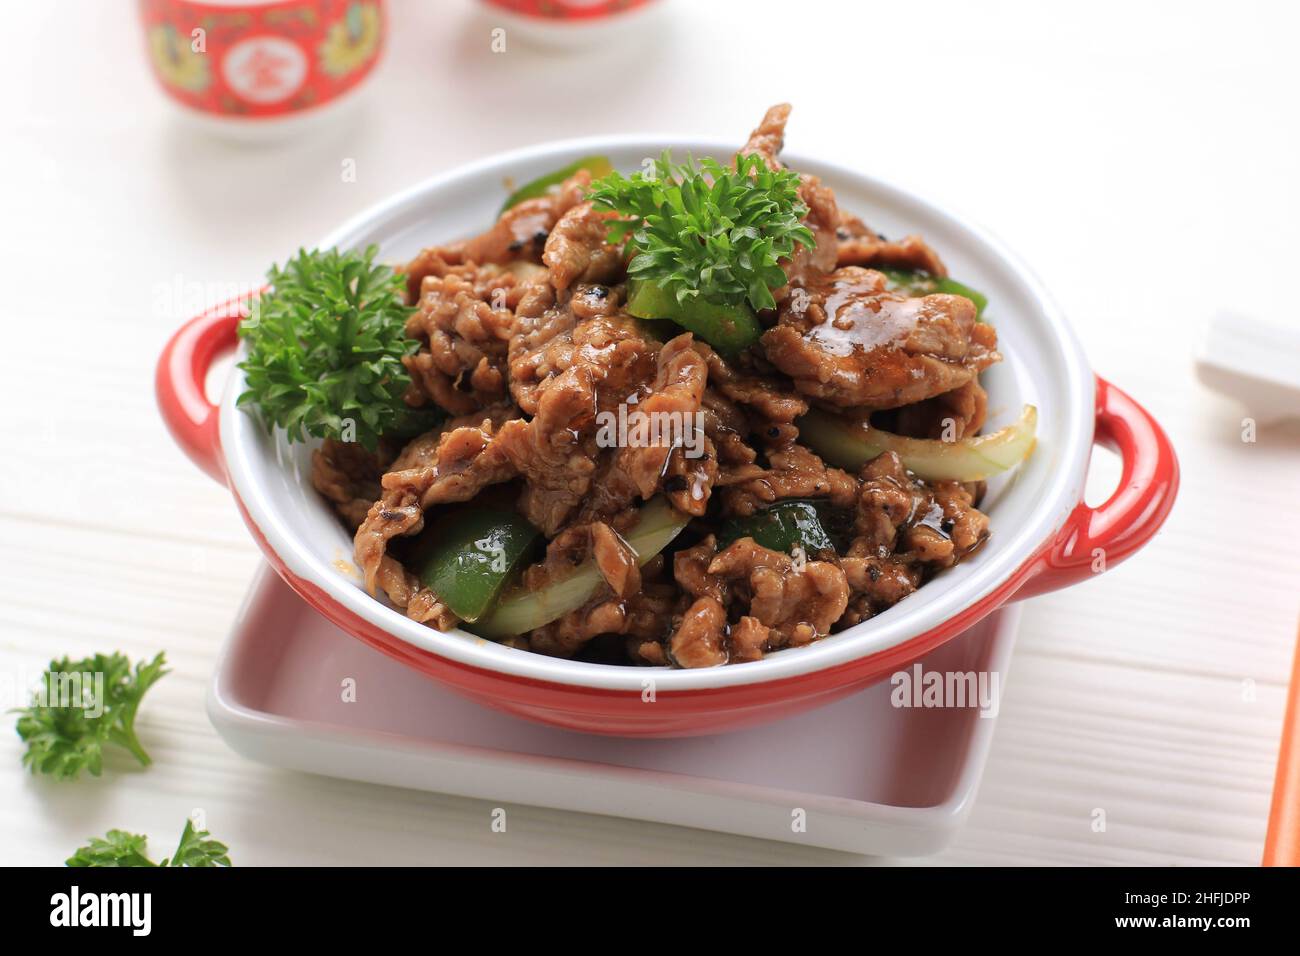 Sapi Lada hitam, Indonesian and Chinese cuisine, stir fried beef with black pepper sauce and red bell peppers, Served on Red Plate Stock Photo